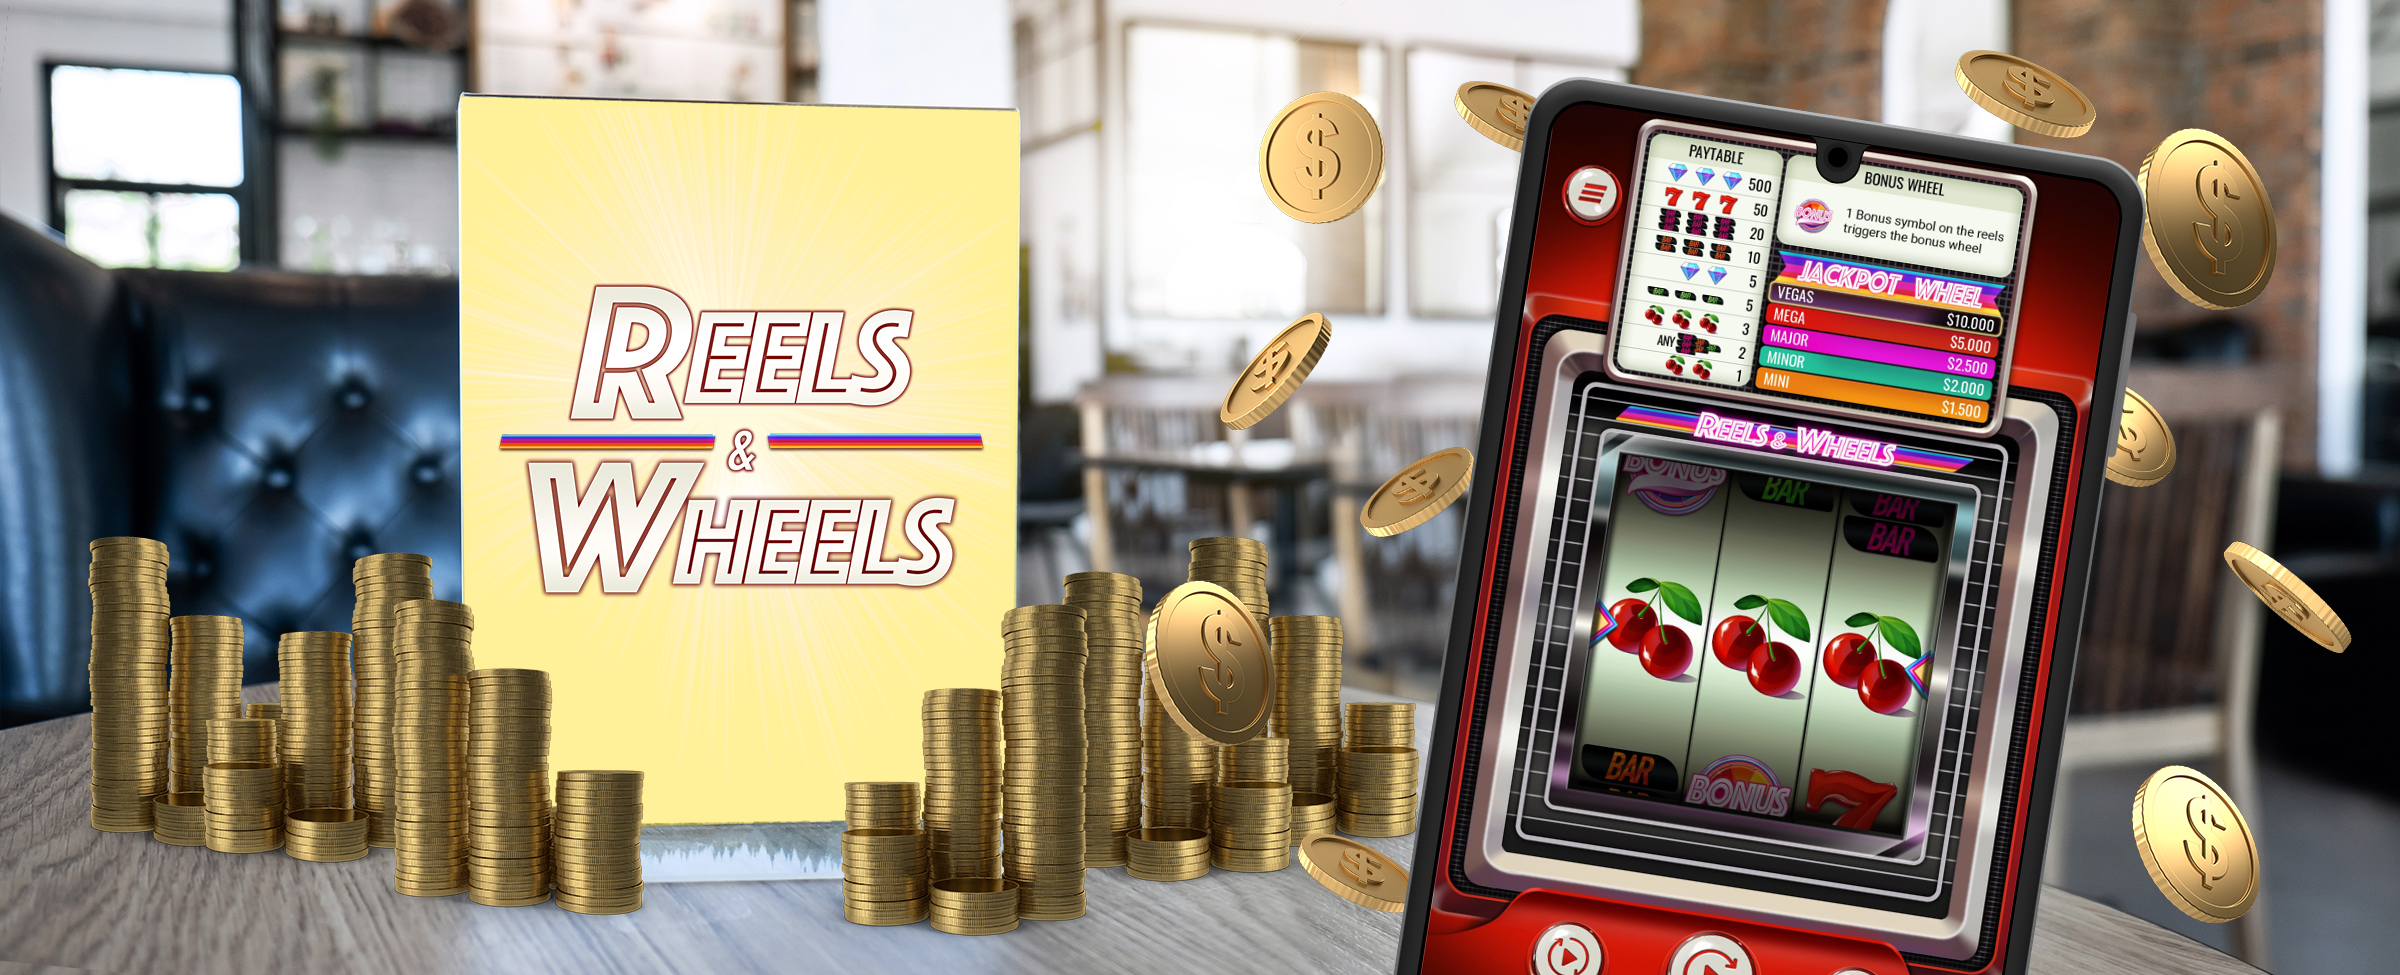 A mobile phone is featured, previewing the slot game “Reels and Wheels” from Cafe Casino. To the left, a stand-up menu is positioned on a cafe table that bears the text of the same game, surrounded by stacks of gold coins. Into the distance is the inside of an empty cafe.